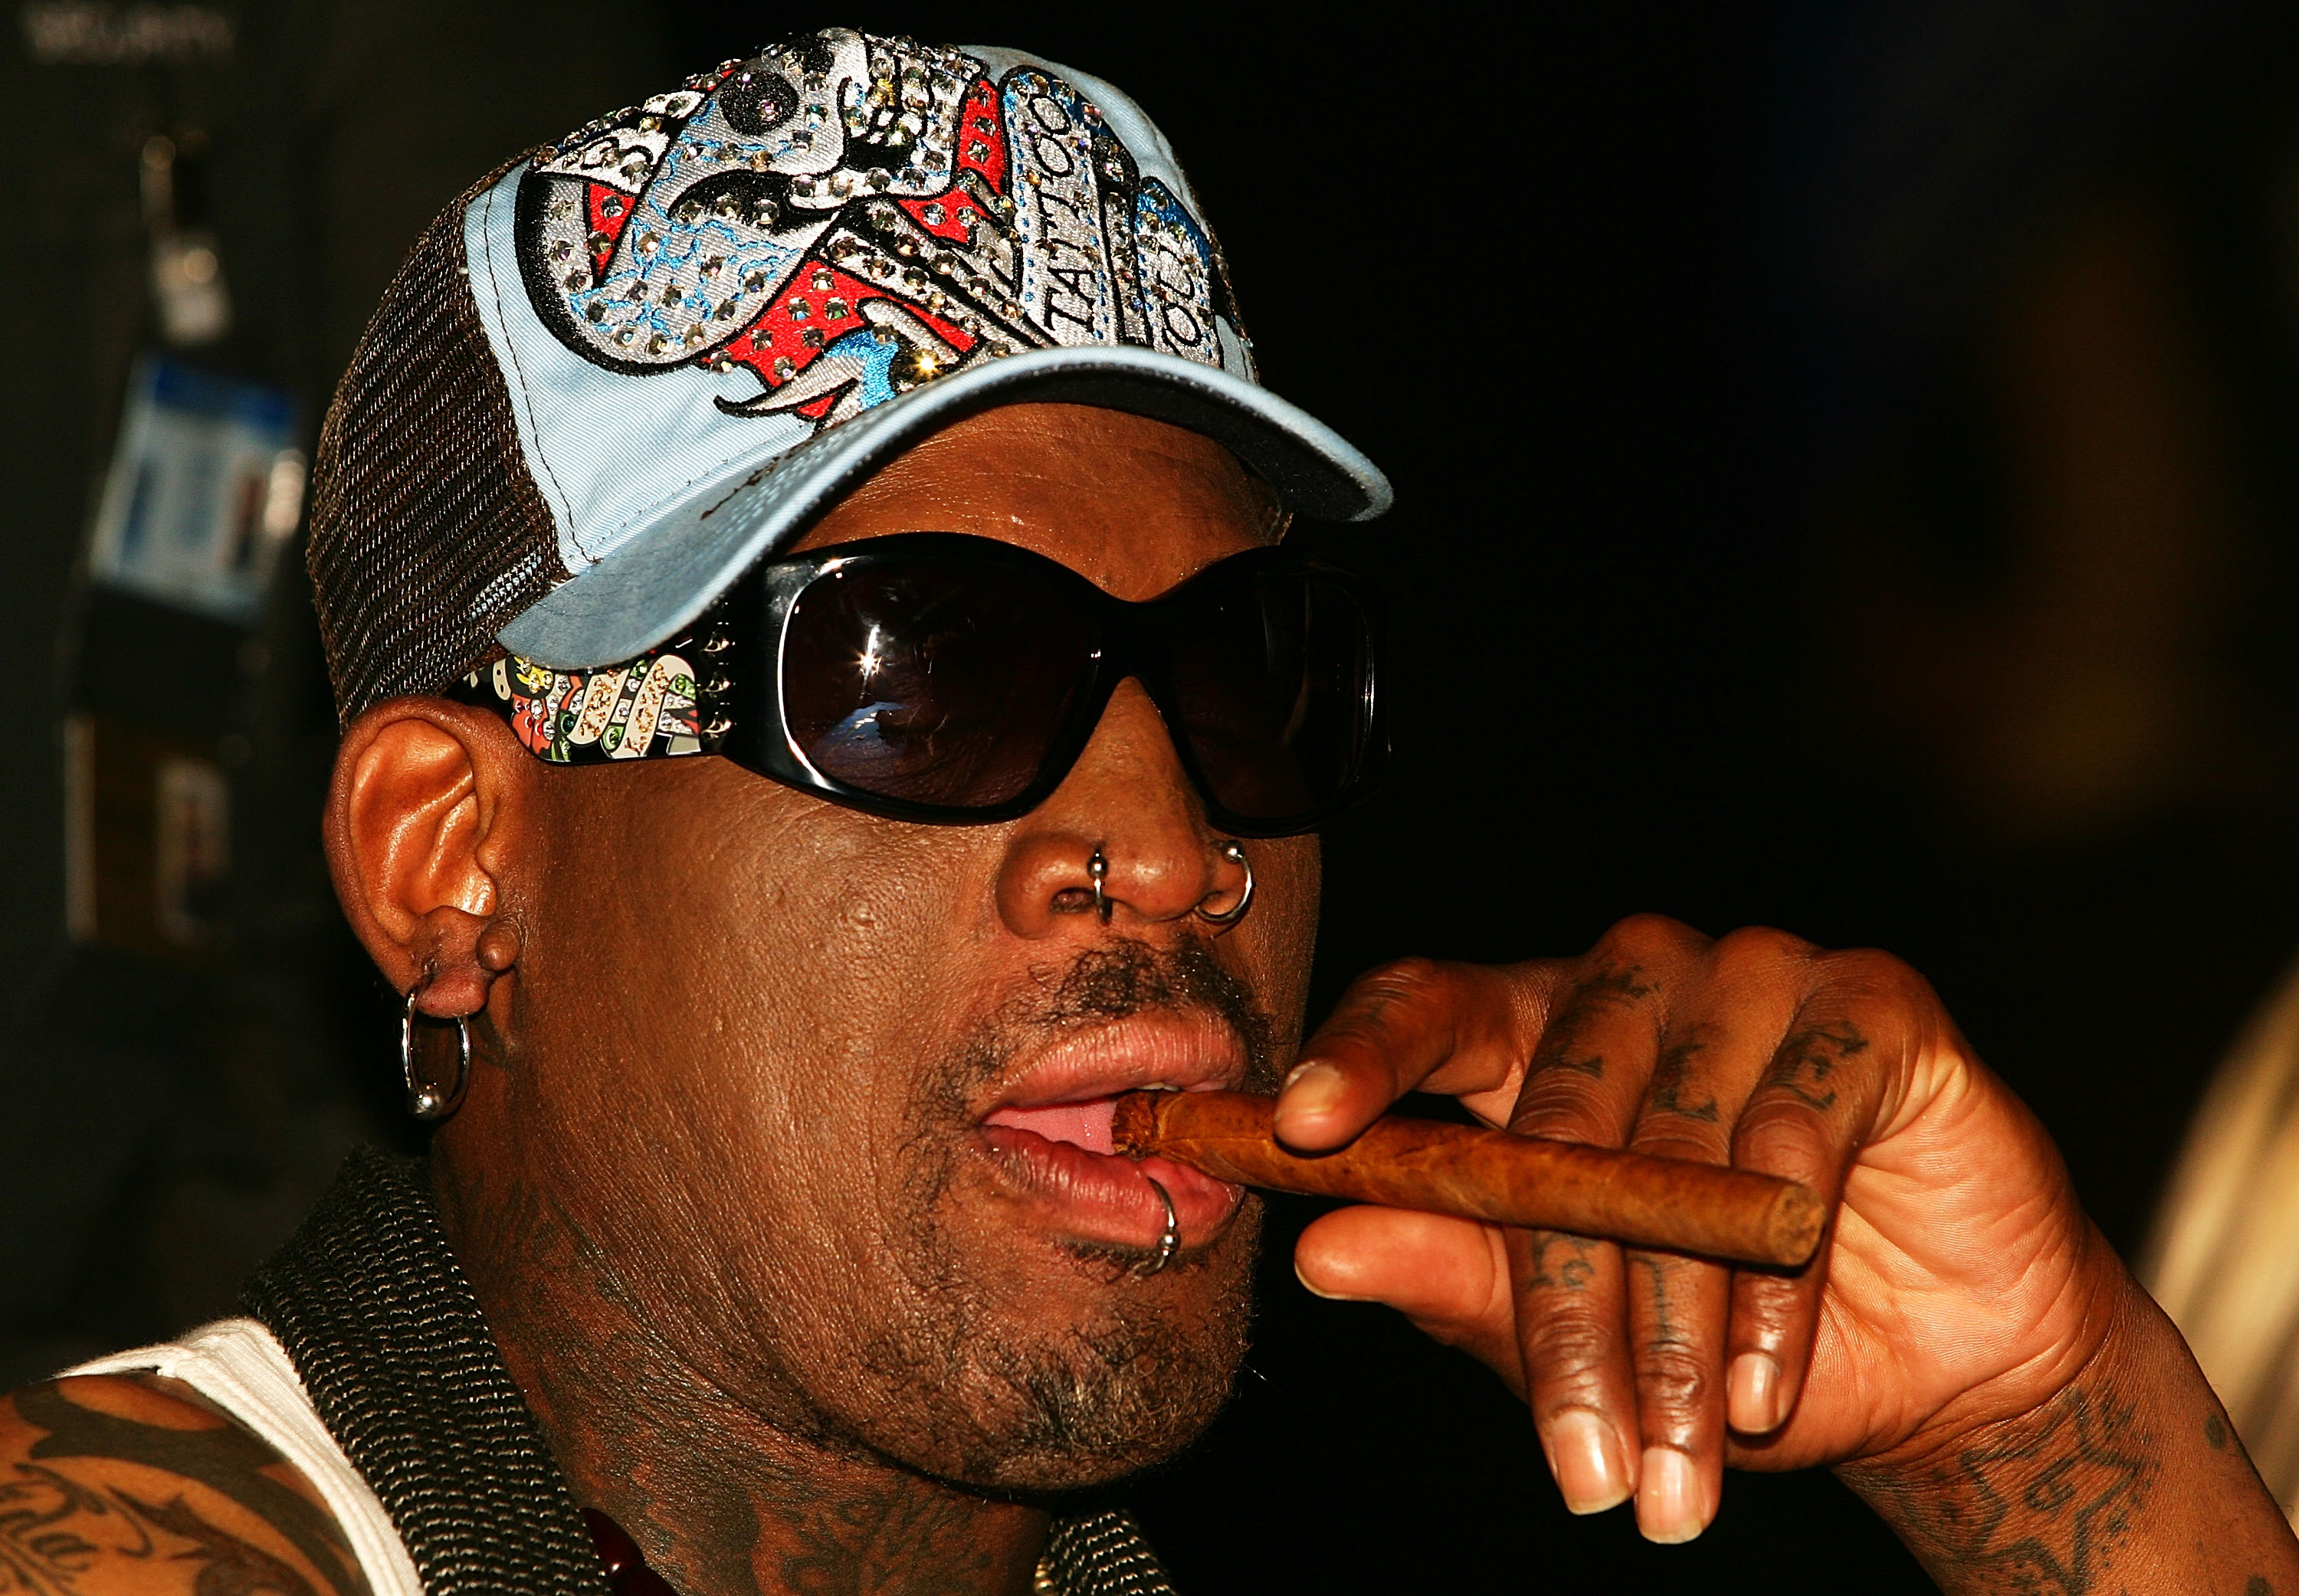 SYDNEY, AUSTRALIA - MARCH 20:  Dennis Rodman attends the Battle of the Codes poker game held at Star City March 20, 2008 in Sydney, Australia.  (Photo by Matt King/Getty Images)